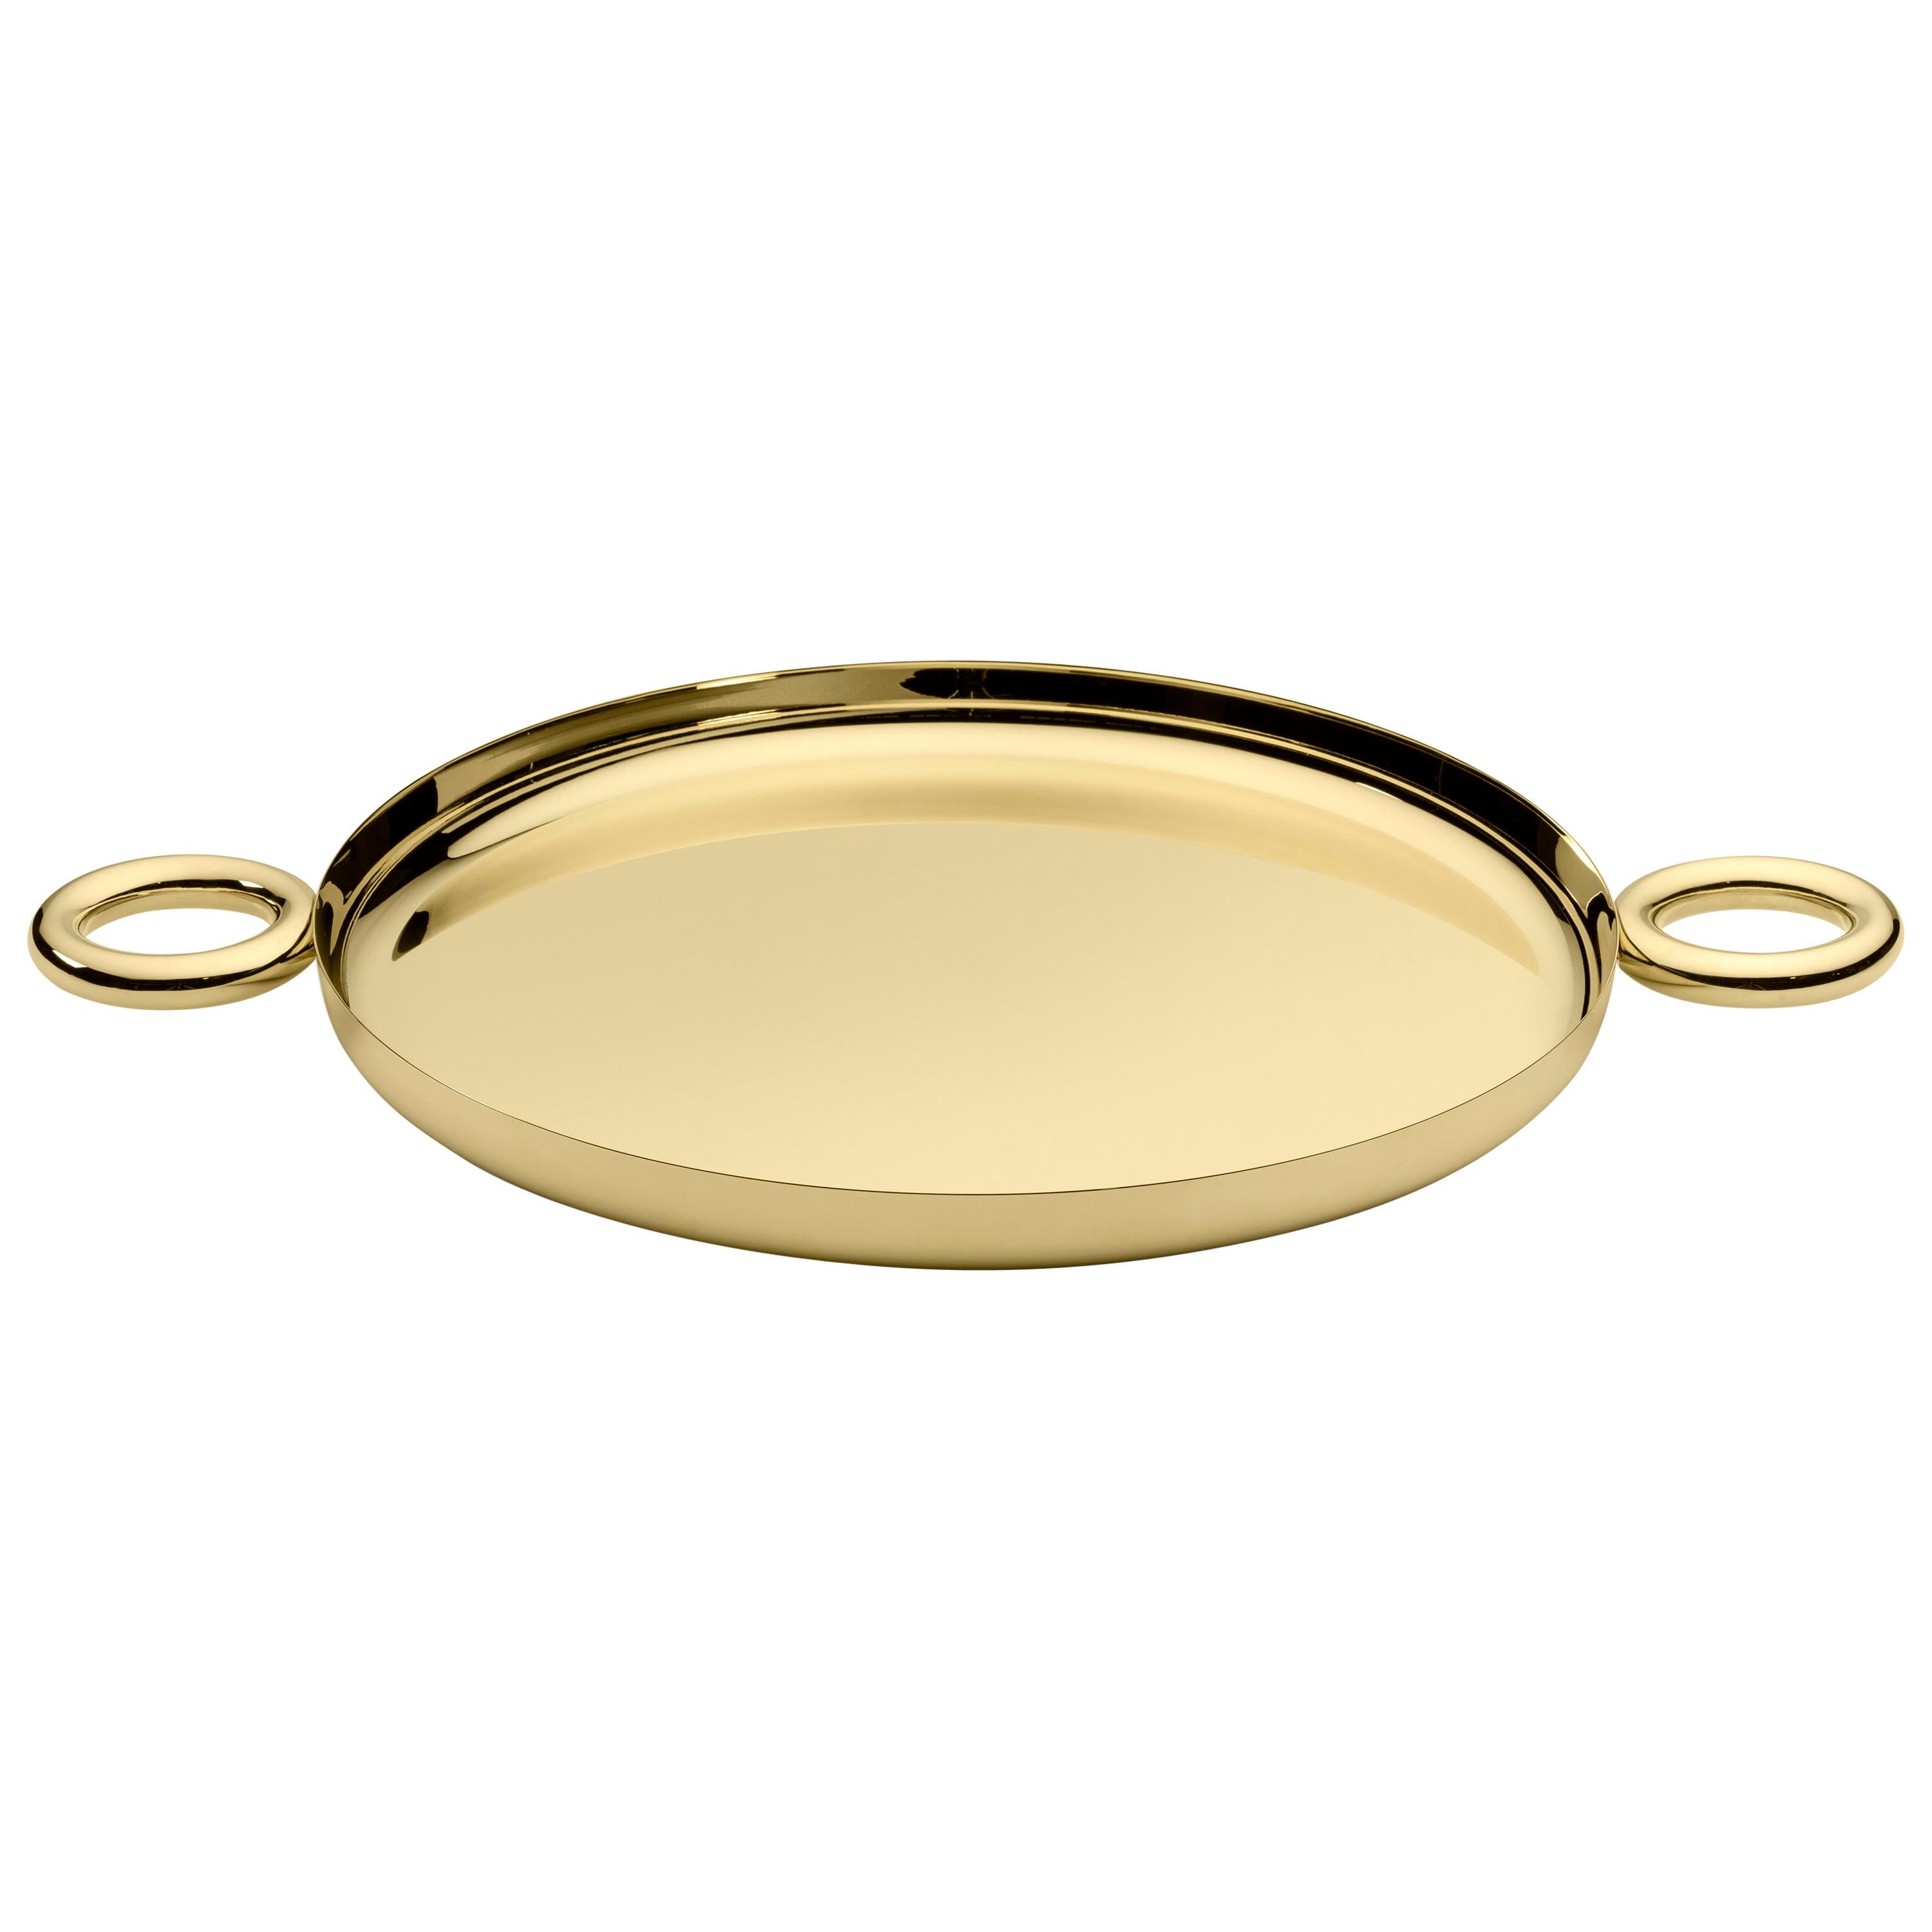 O Tray in 24K Gold Plated Stainless Steel by Richard Hutten